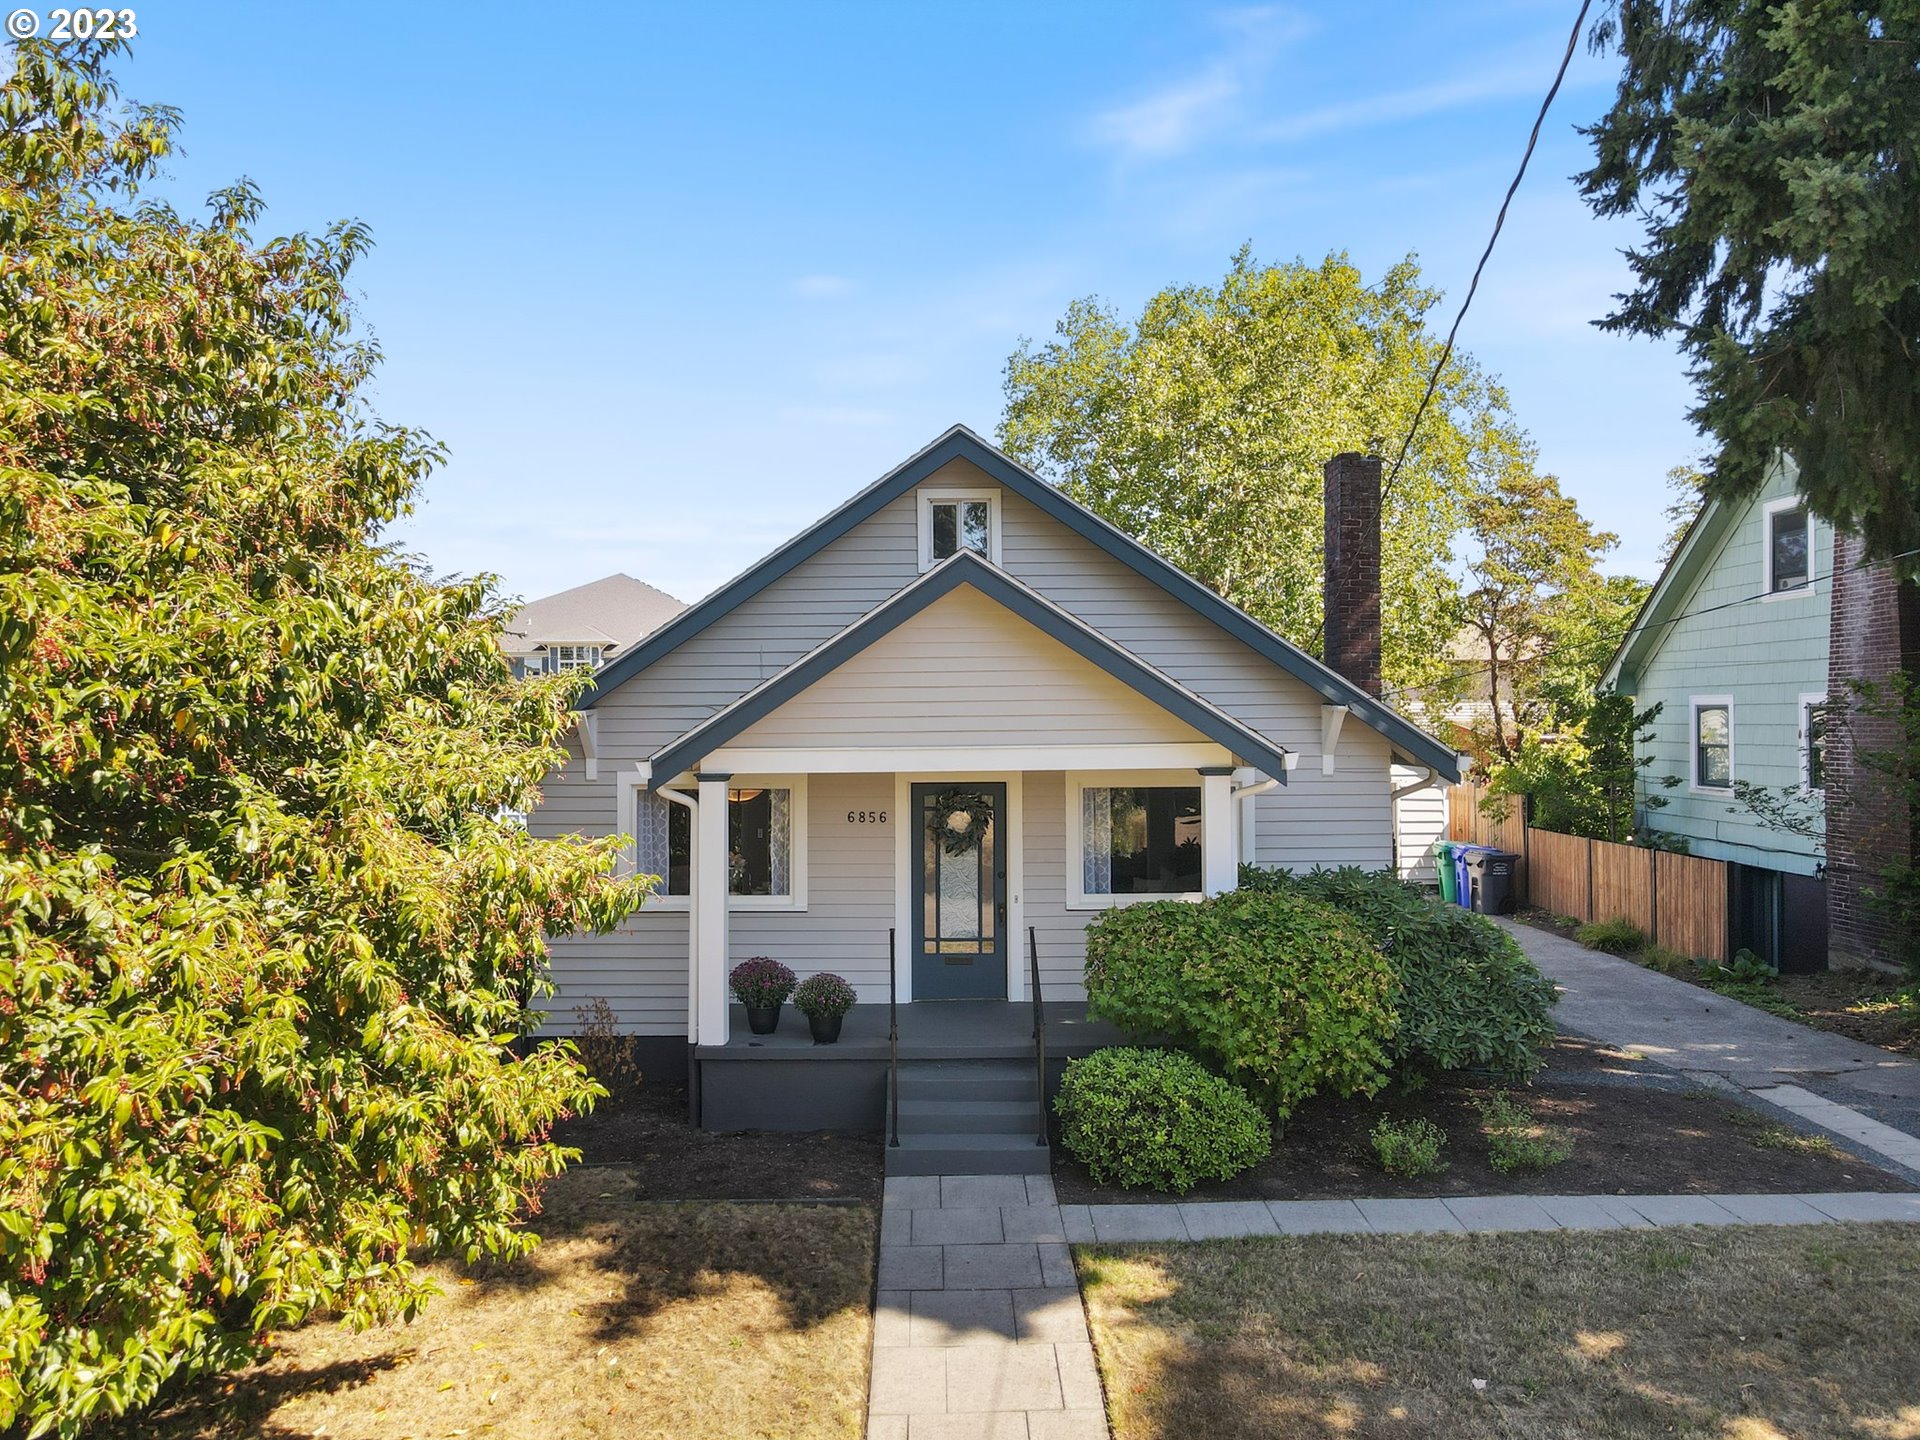 6856 N CONCORD AVE, Portland, OR 97217